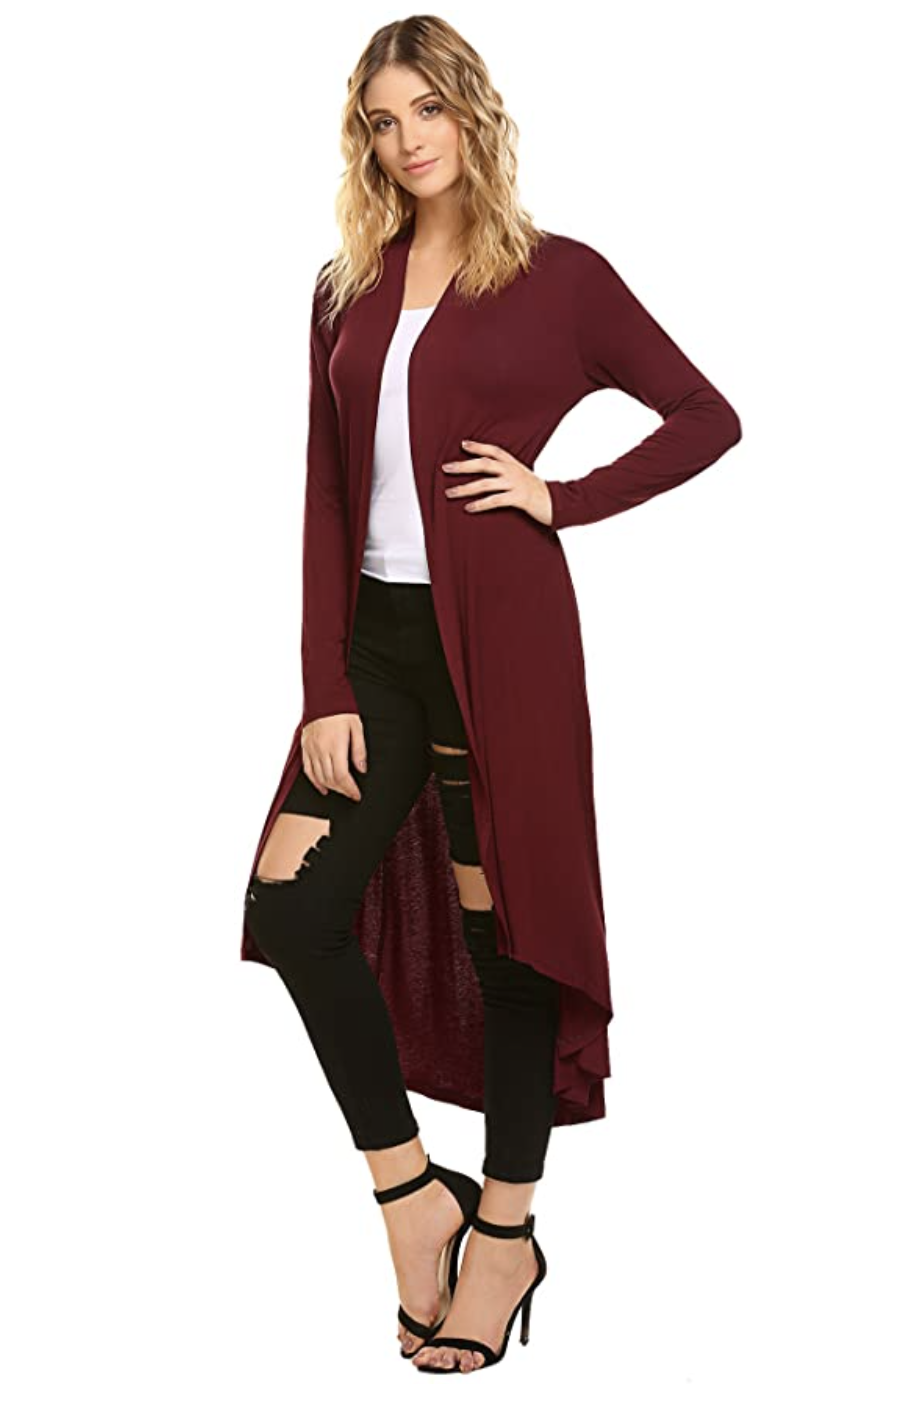 Pogtmm Maxi Cardigan Adds Instant Elegance to Your Look | Us Weekly